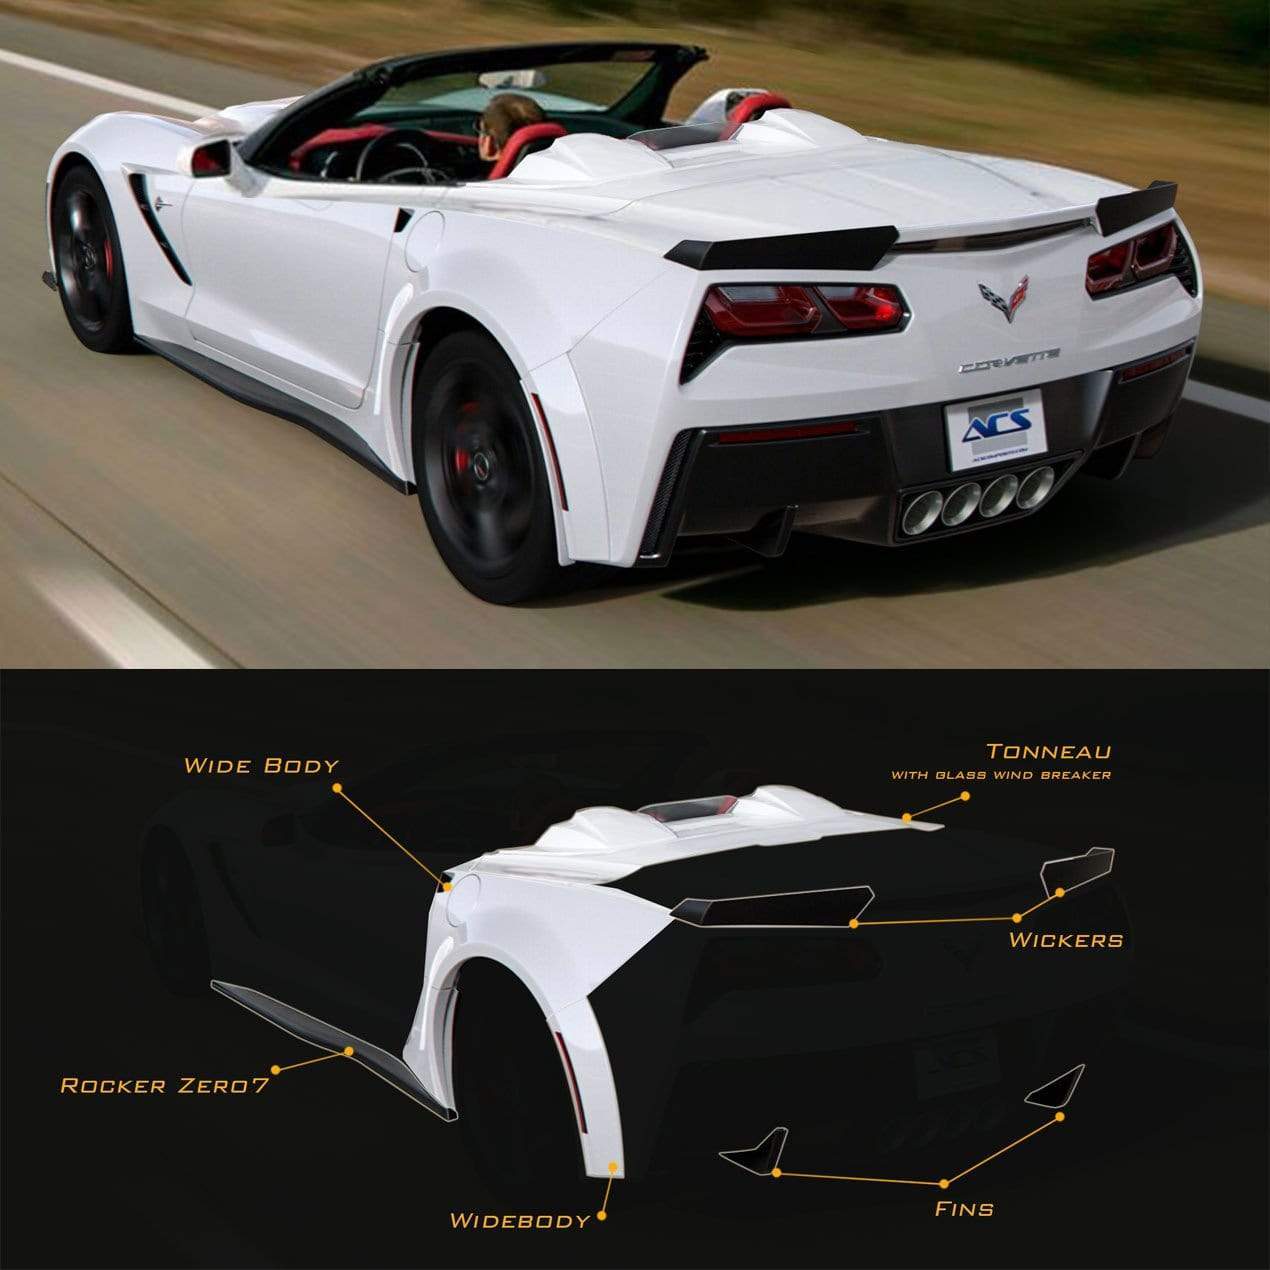 ACS Composite Convertible Rear Widebody Kit with Z06 Scoop for C7 Corvette Stingray Convertible, SKU 45-4-103 PRM.